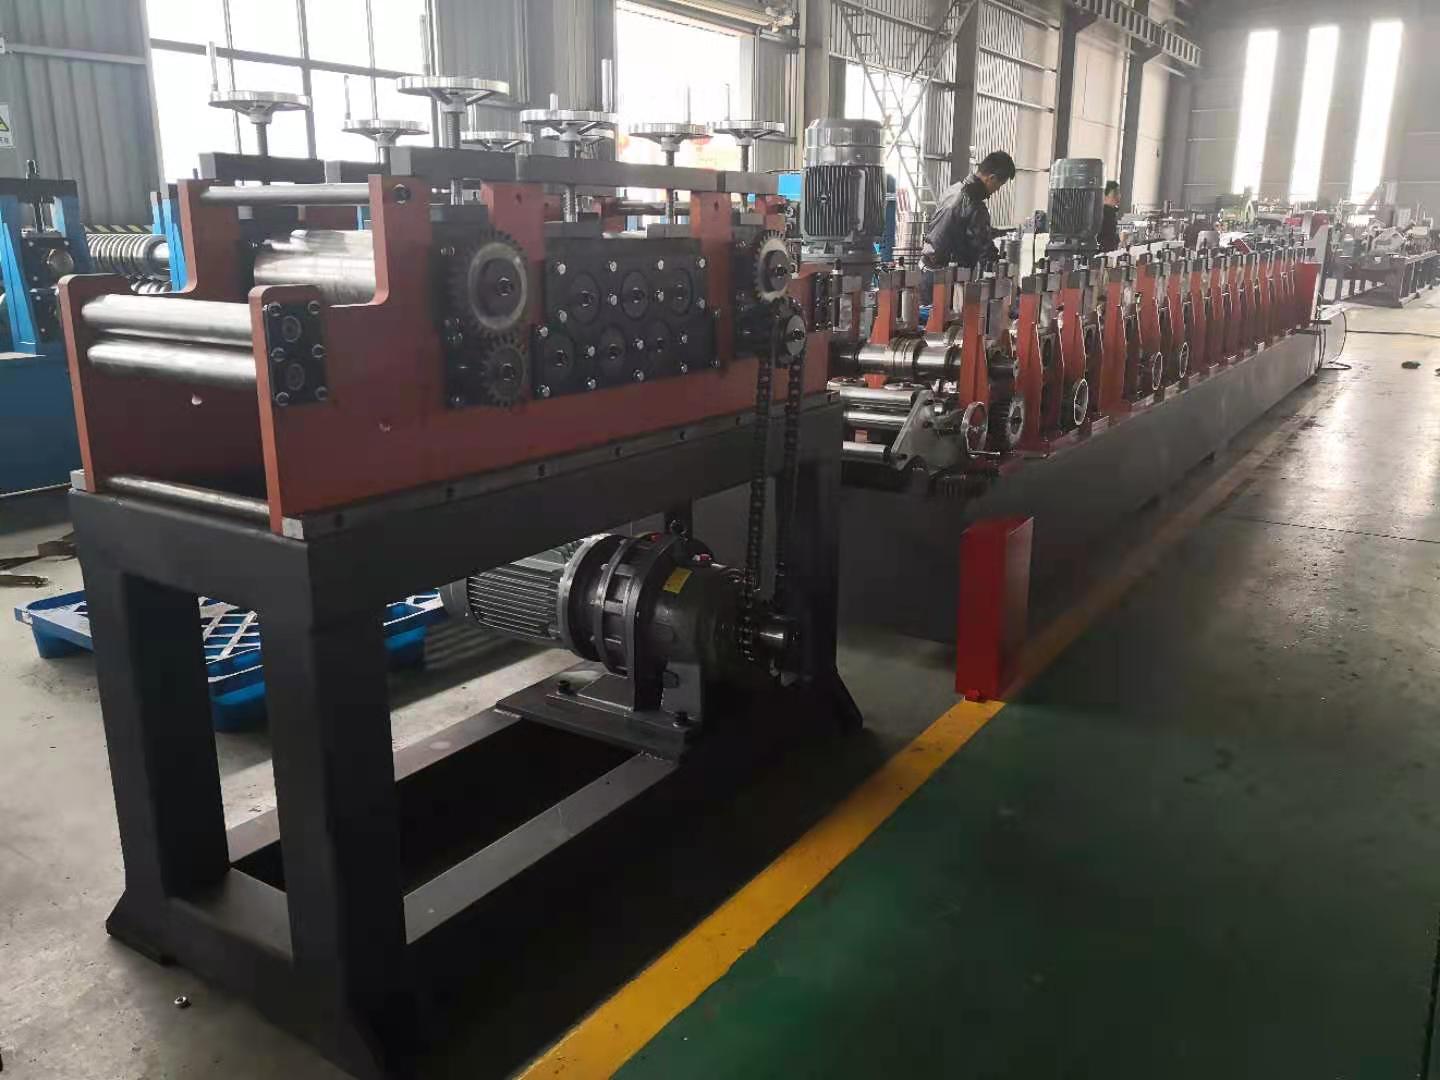 C Purlin Used For the Construction Frame Cold Roll Forming Machine With Gear Box Driving